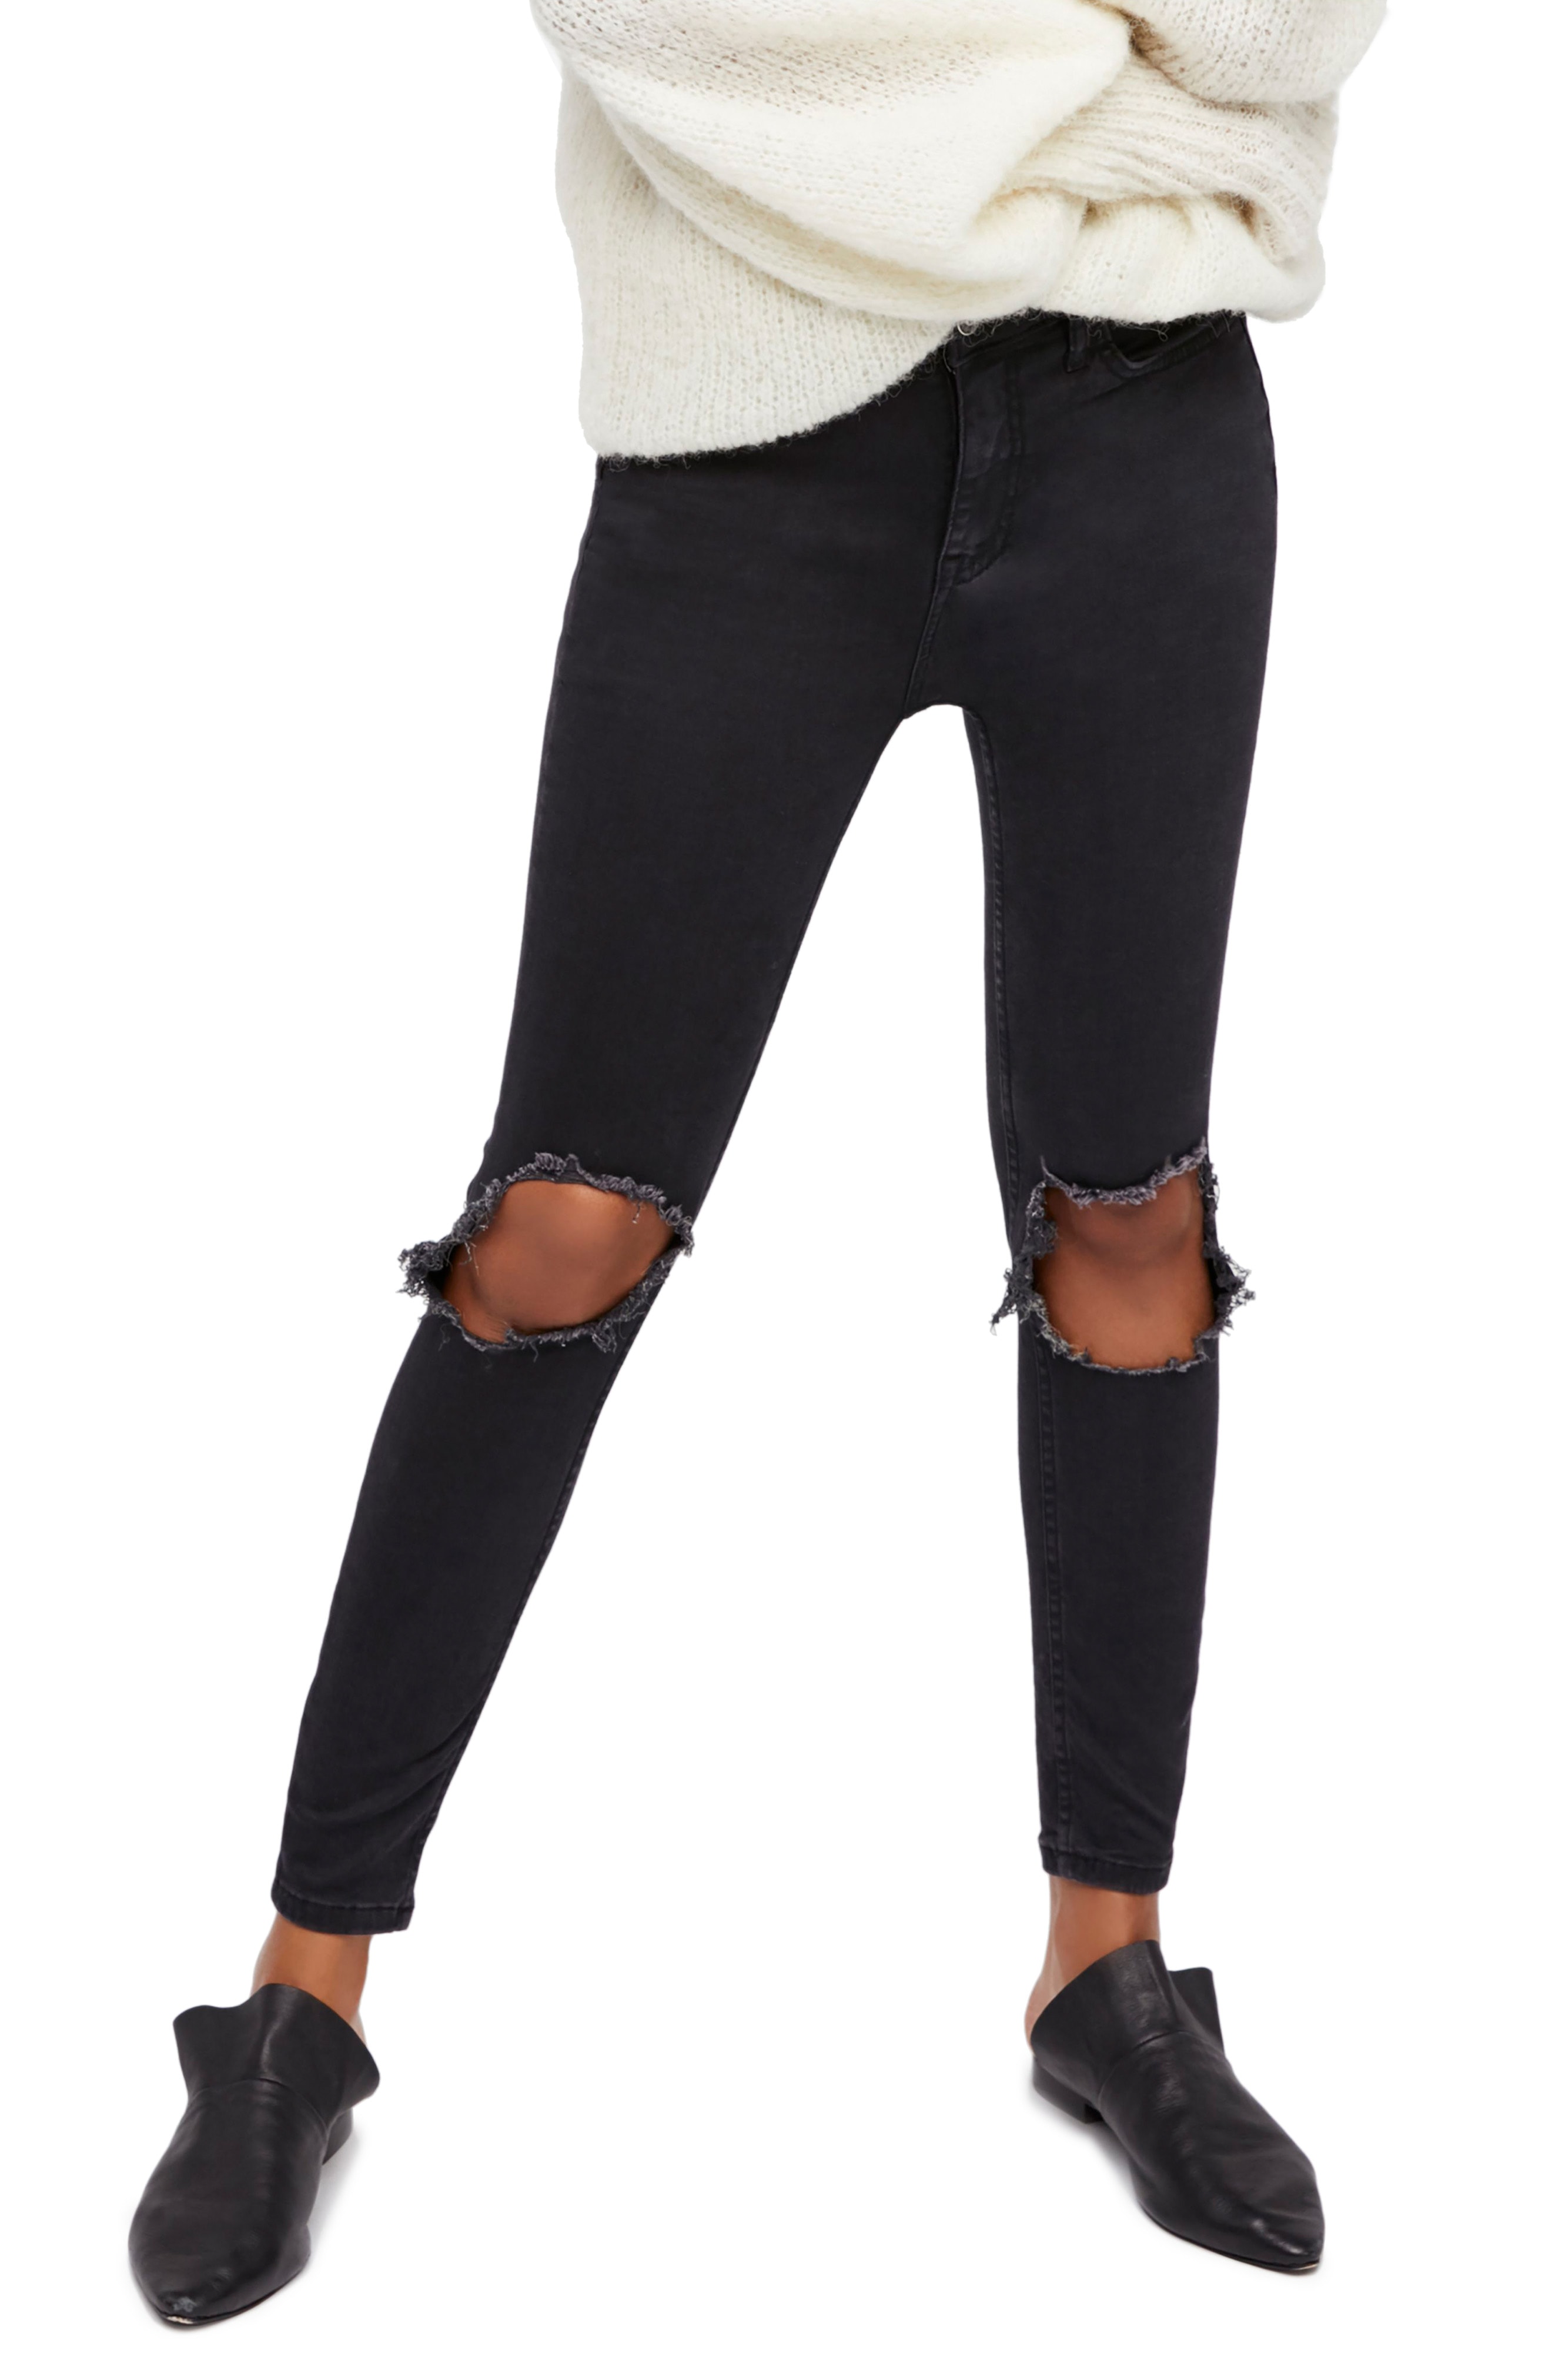 Ripped black jeans | Nordstrom